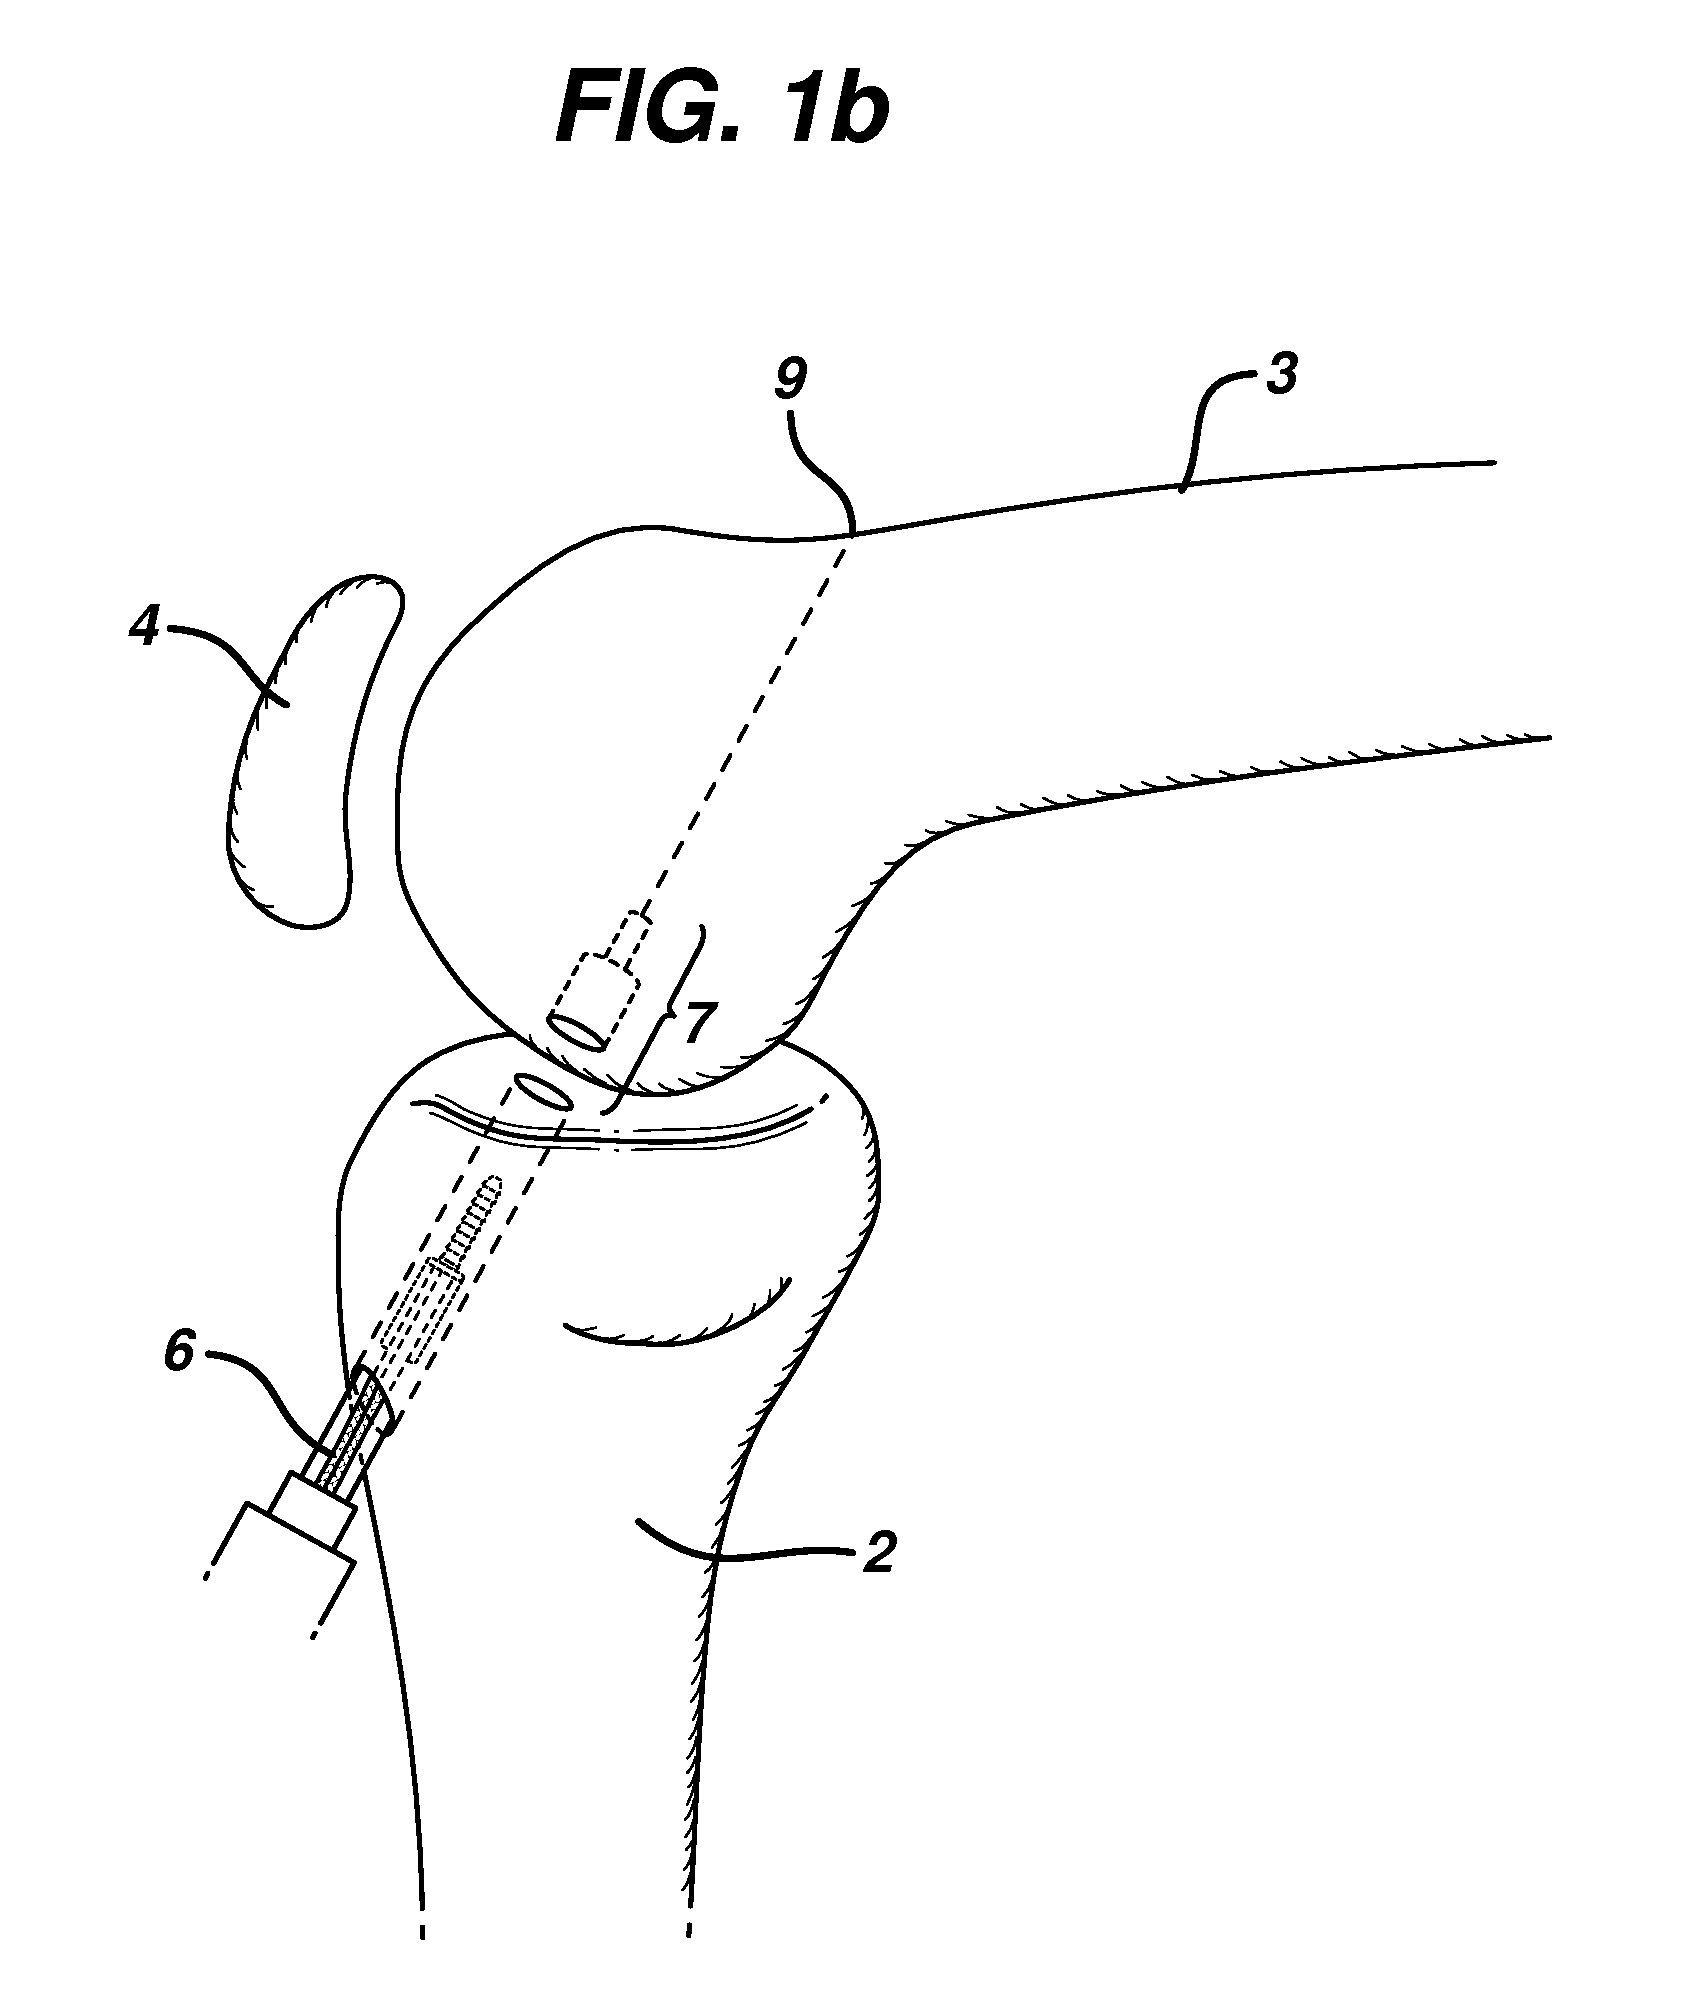 Method for anchoring autologous or artificial tendon grafts in bone